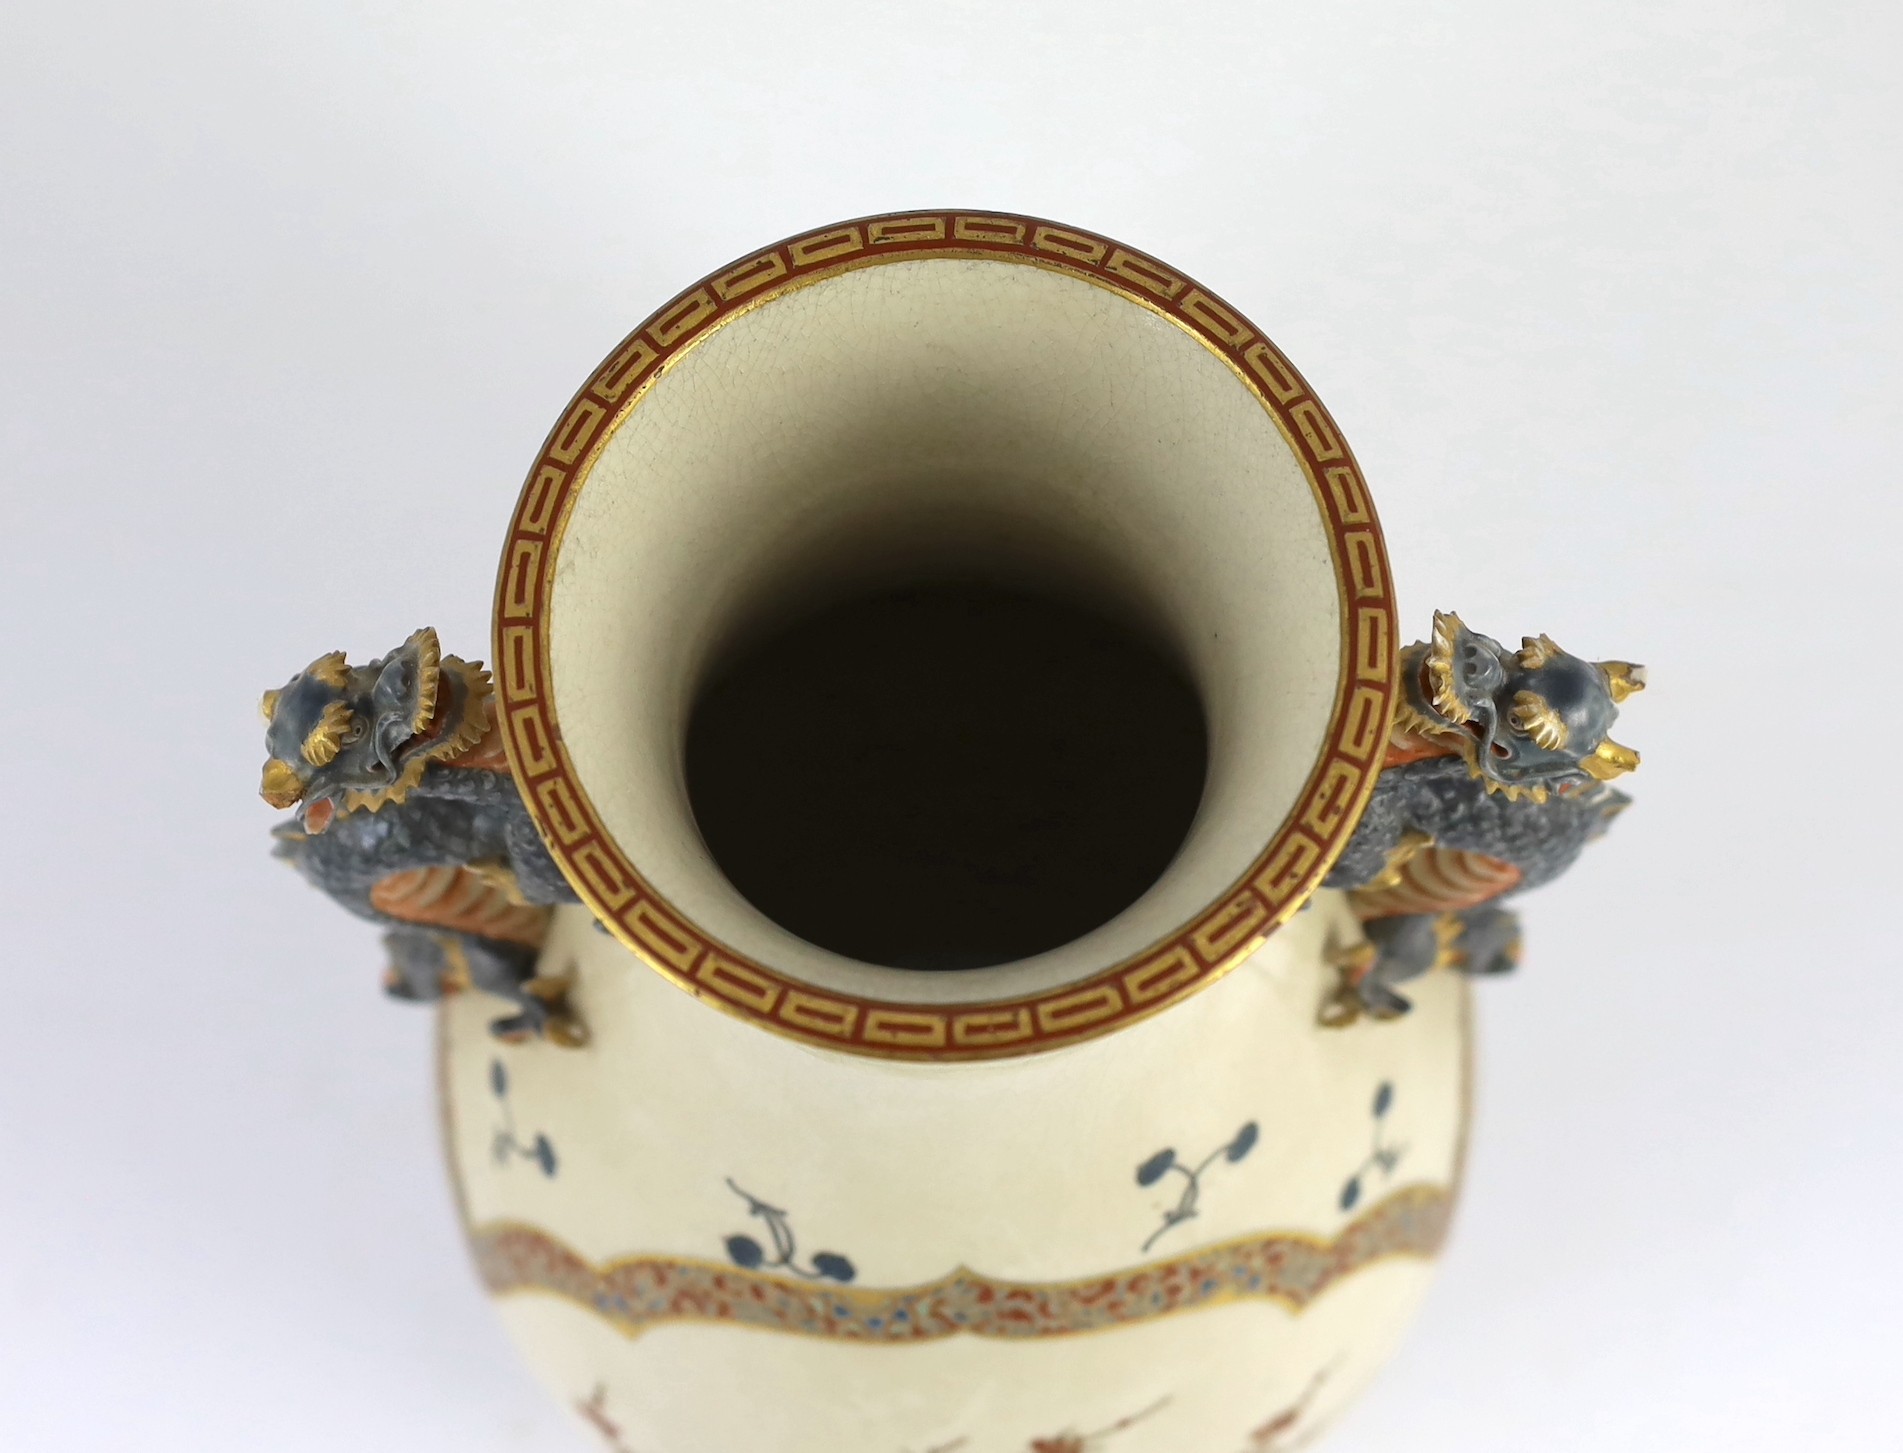 A large Japanese Satsuma pottery vase, late 19th century, finely gilded and painted in enamels - Image 6 of 9